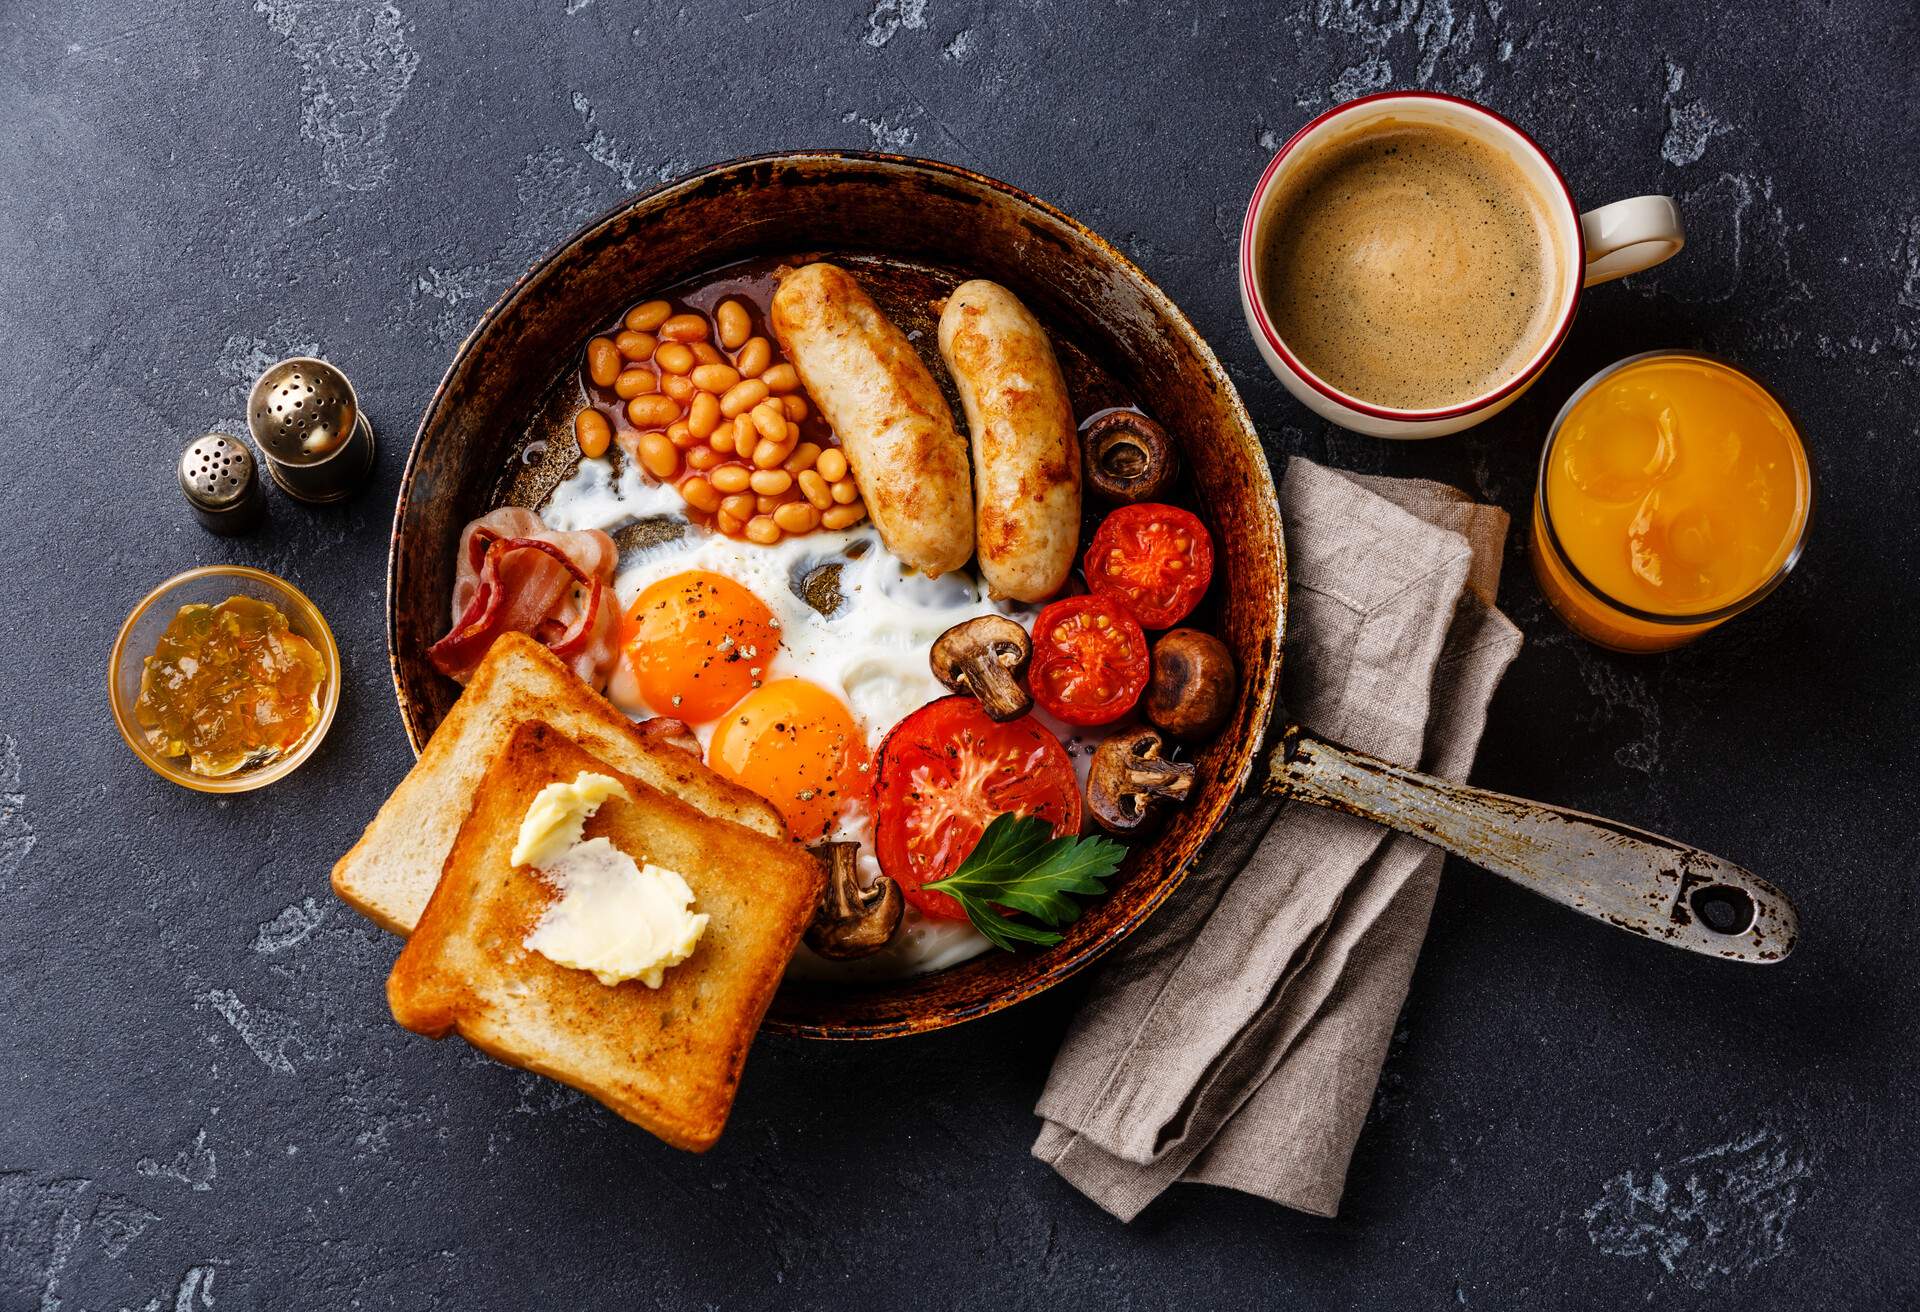 English breakfast in pan with fried eggs, sausages, bacon, beans, toasts and coffee on dark stone background; Shutterstock ID 558715117